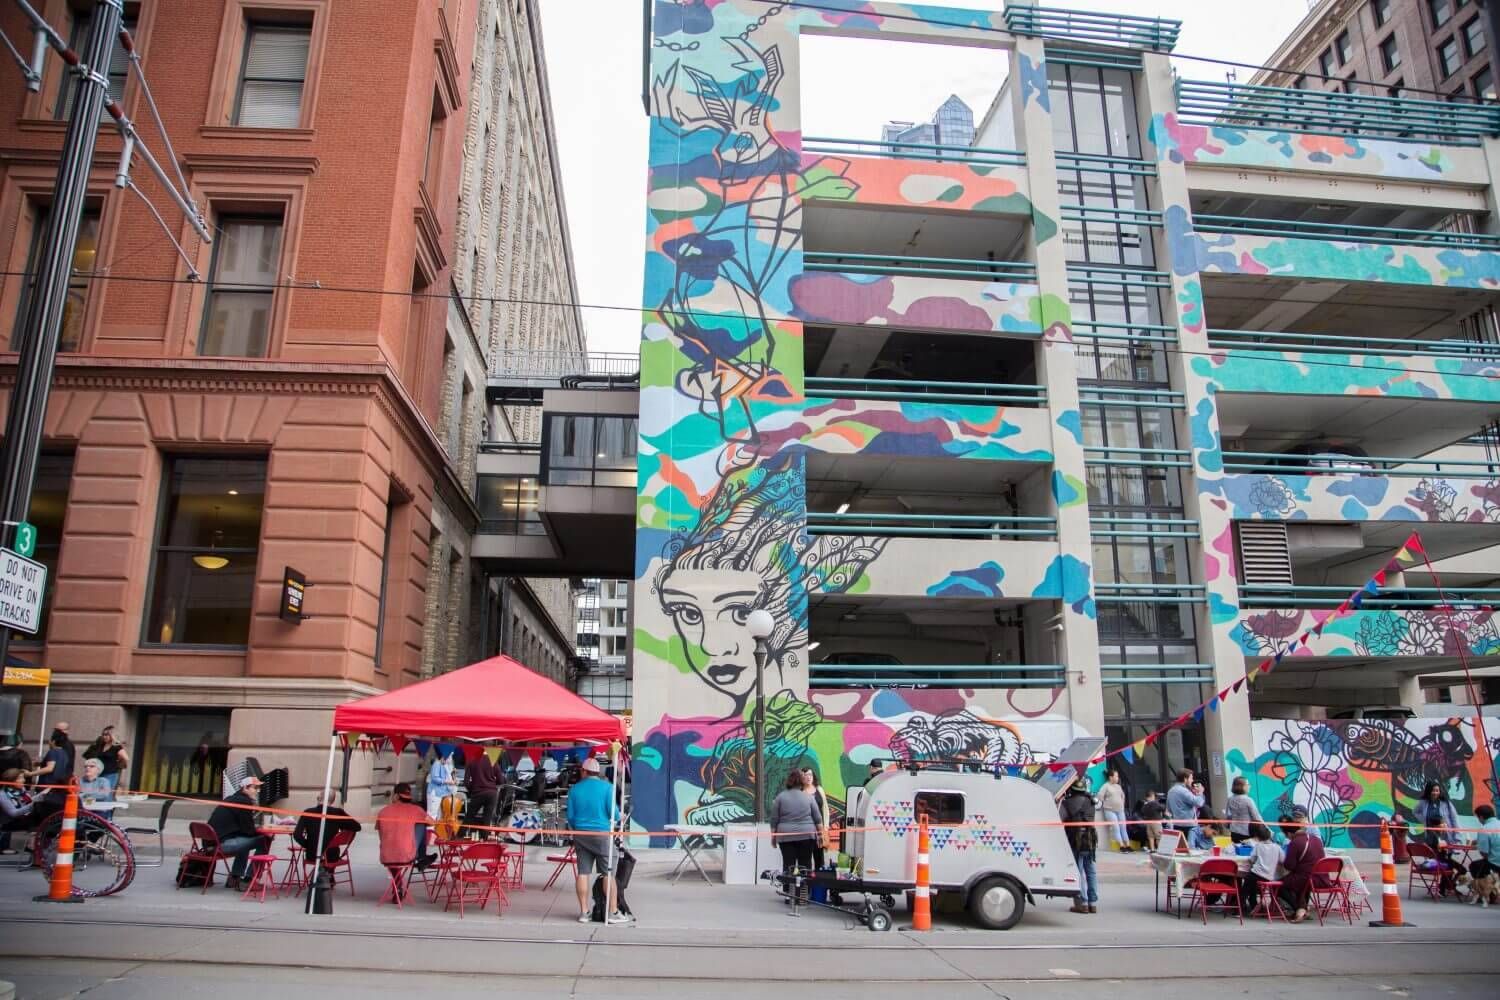 4th Street Block Party, celebrating the unveiling of Flows of Interconnected Motifs Mural. Photo: Nkauj Shoua Vang